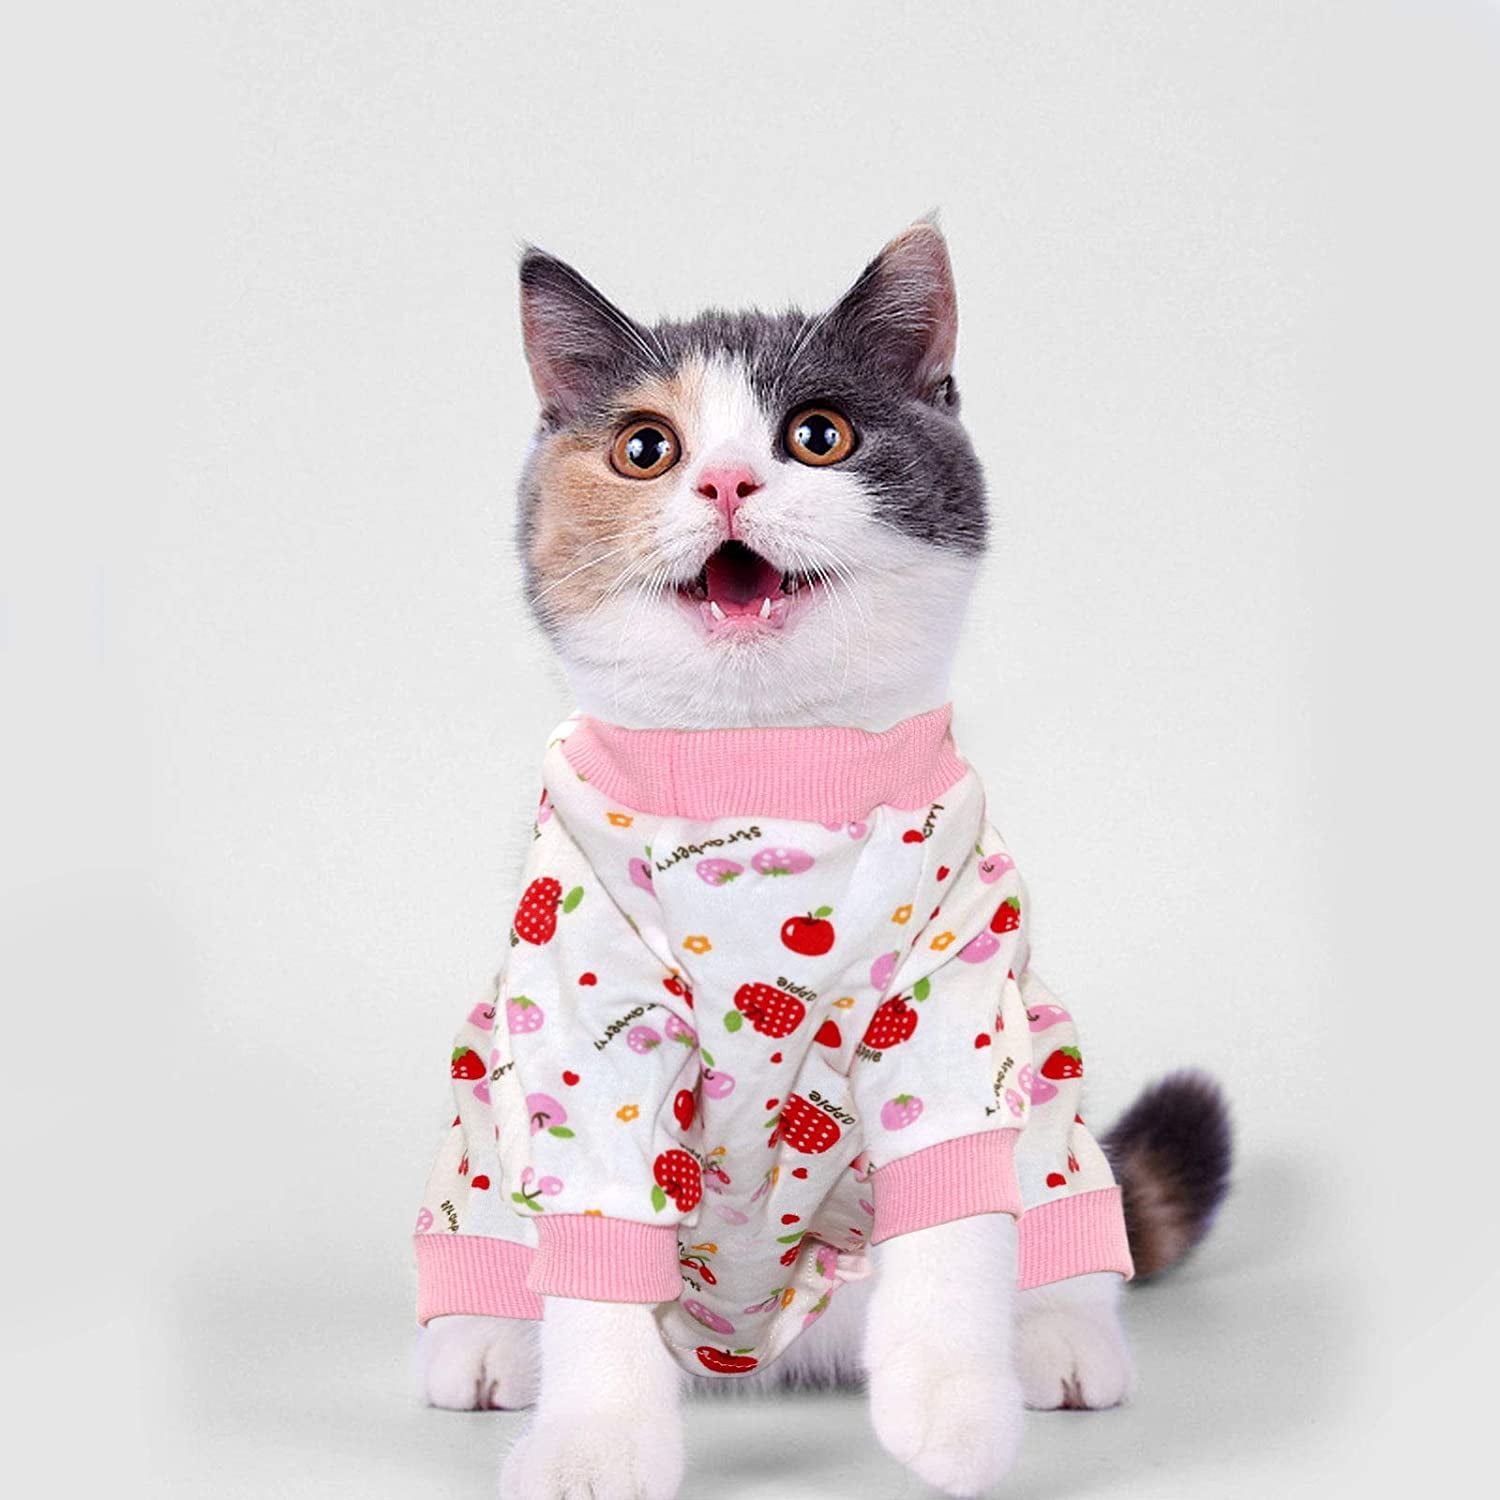 Cute Cat Pajamas Onesie Soft Puppy Rompers Pet Jumpsuits Cozy Bodysuits for Small Dogs and Cats L Rypet Small Dog Pajamas 2 Pack 